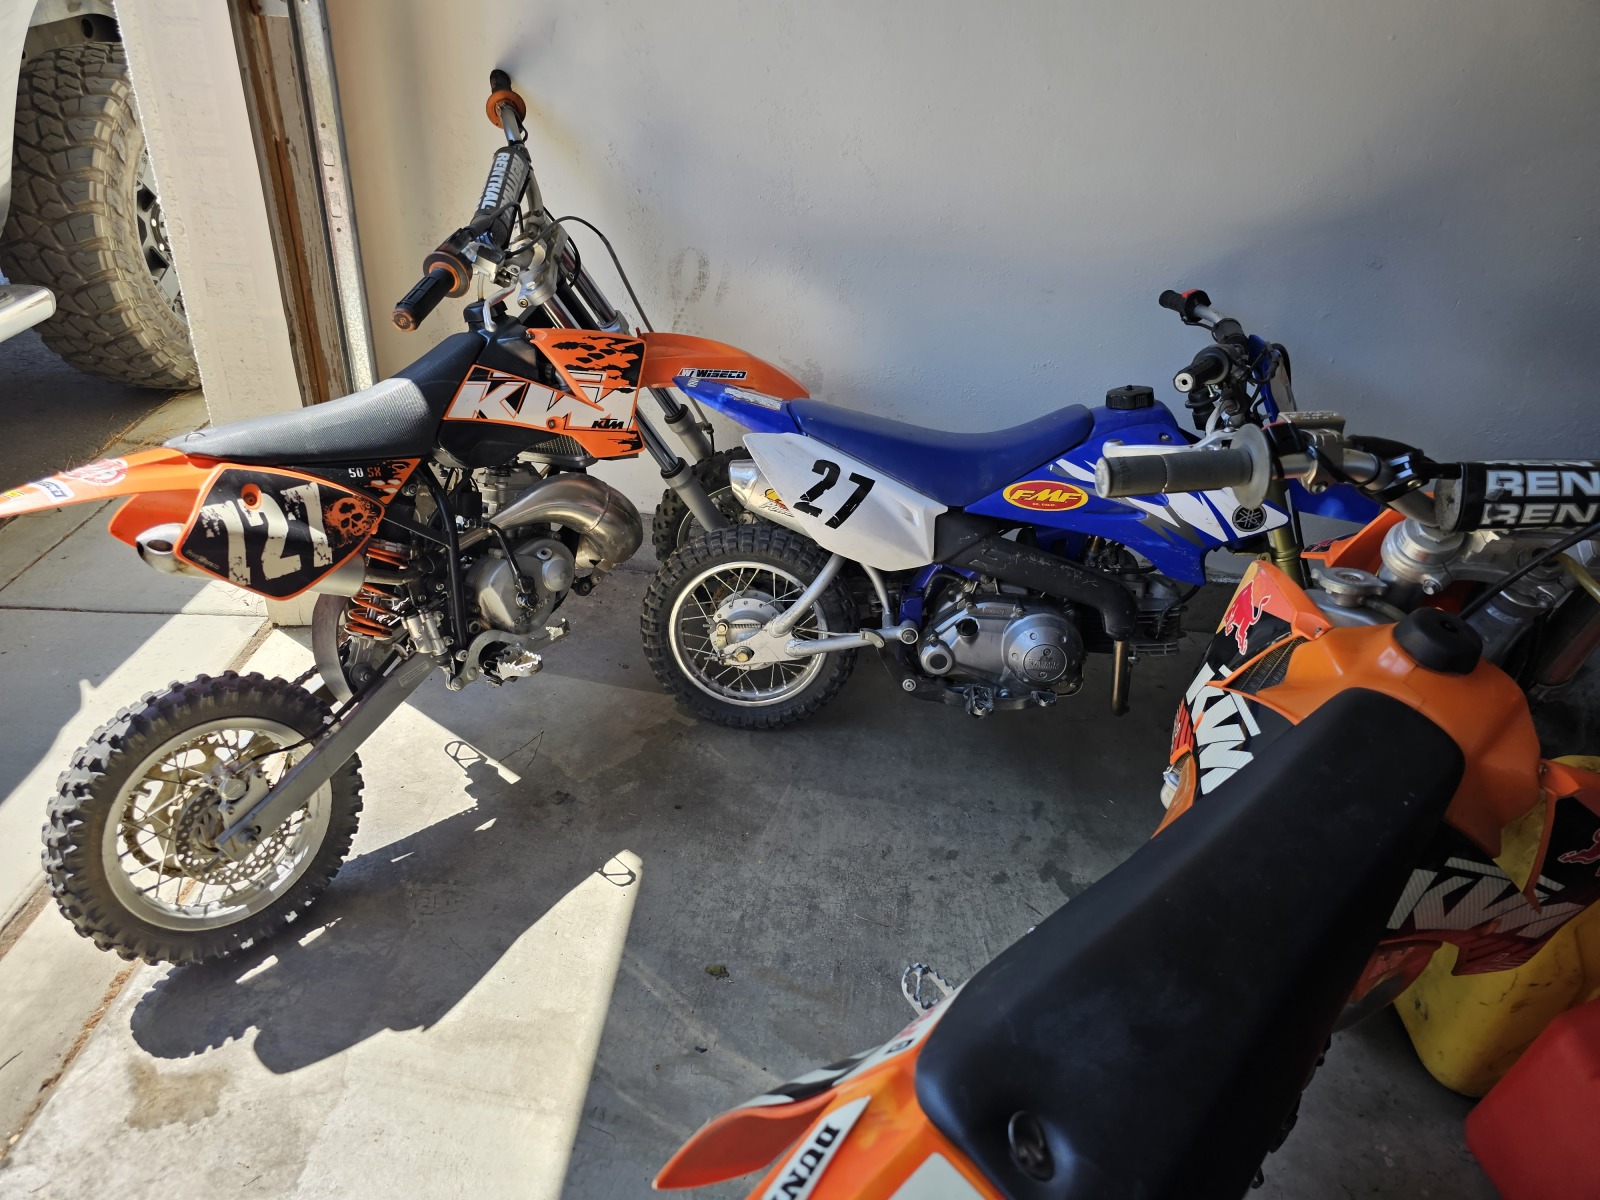 For Sale: 3 youth motorcycles - photo2